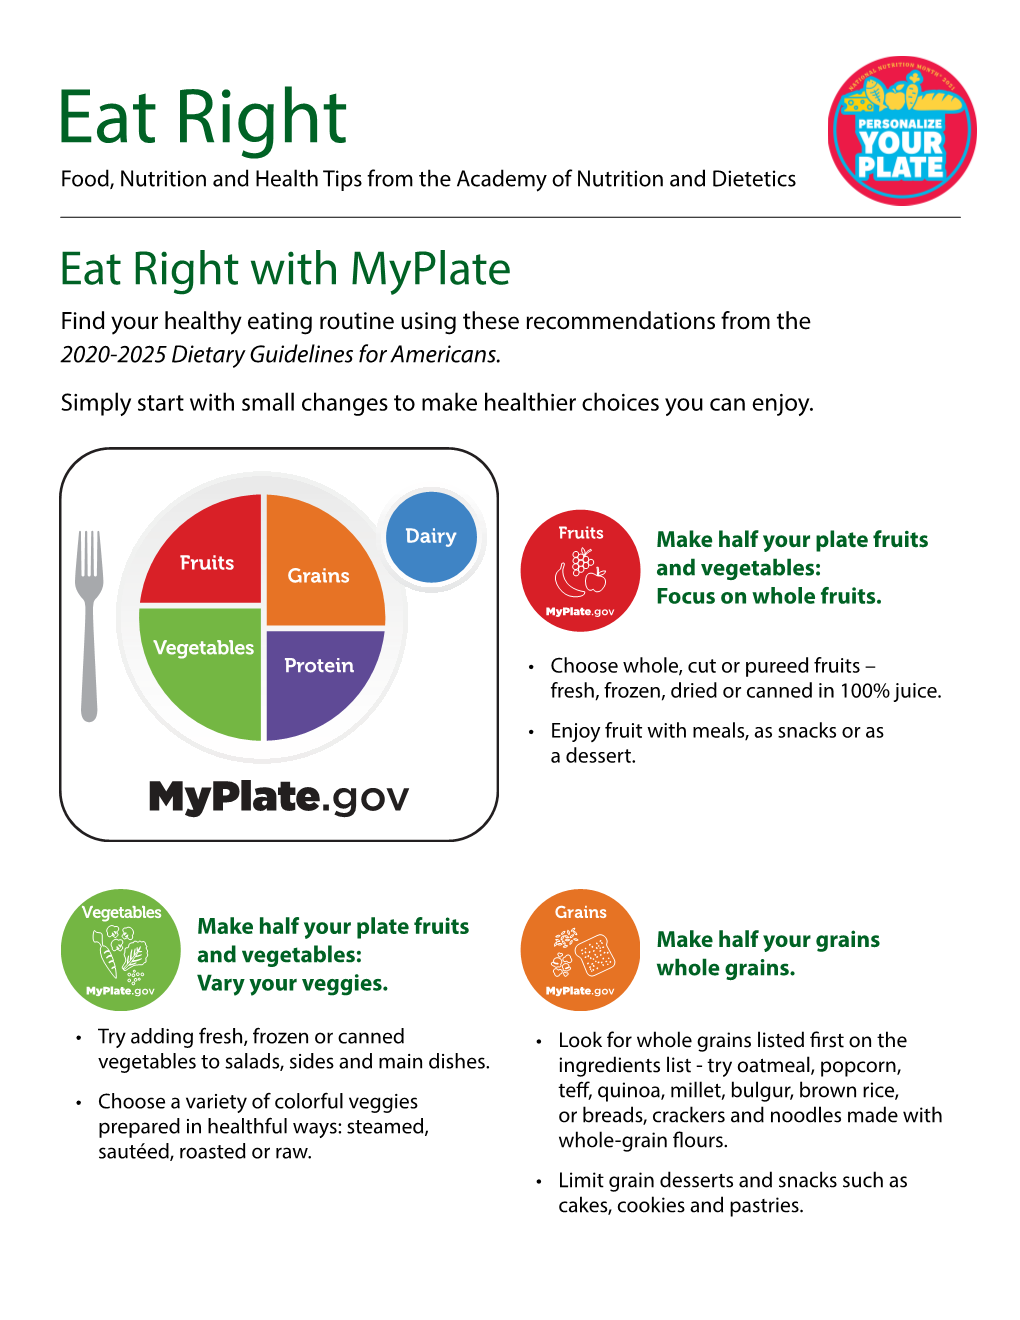 Eat Right with Myplate Find Your Healthy Eating Routine Using These Recommendations from the 2020-2025 Dietary Guidelines for Americans